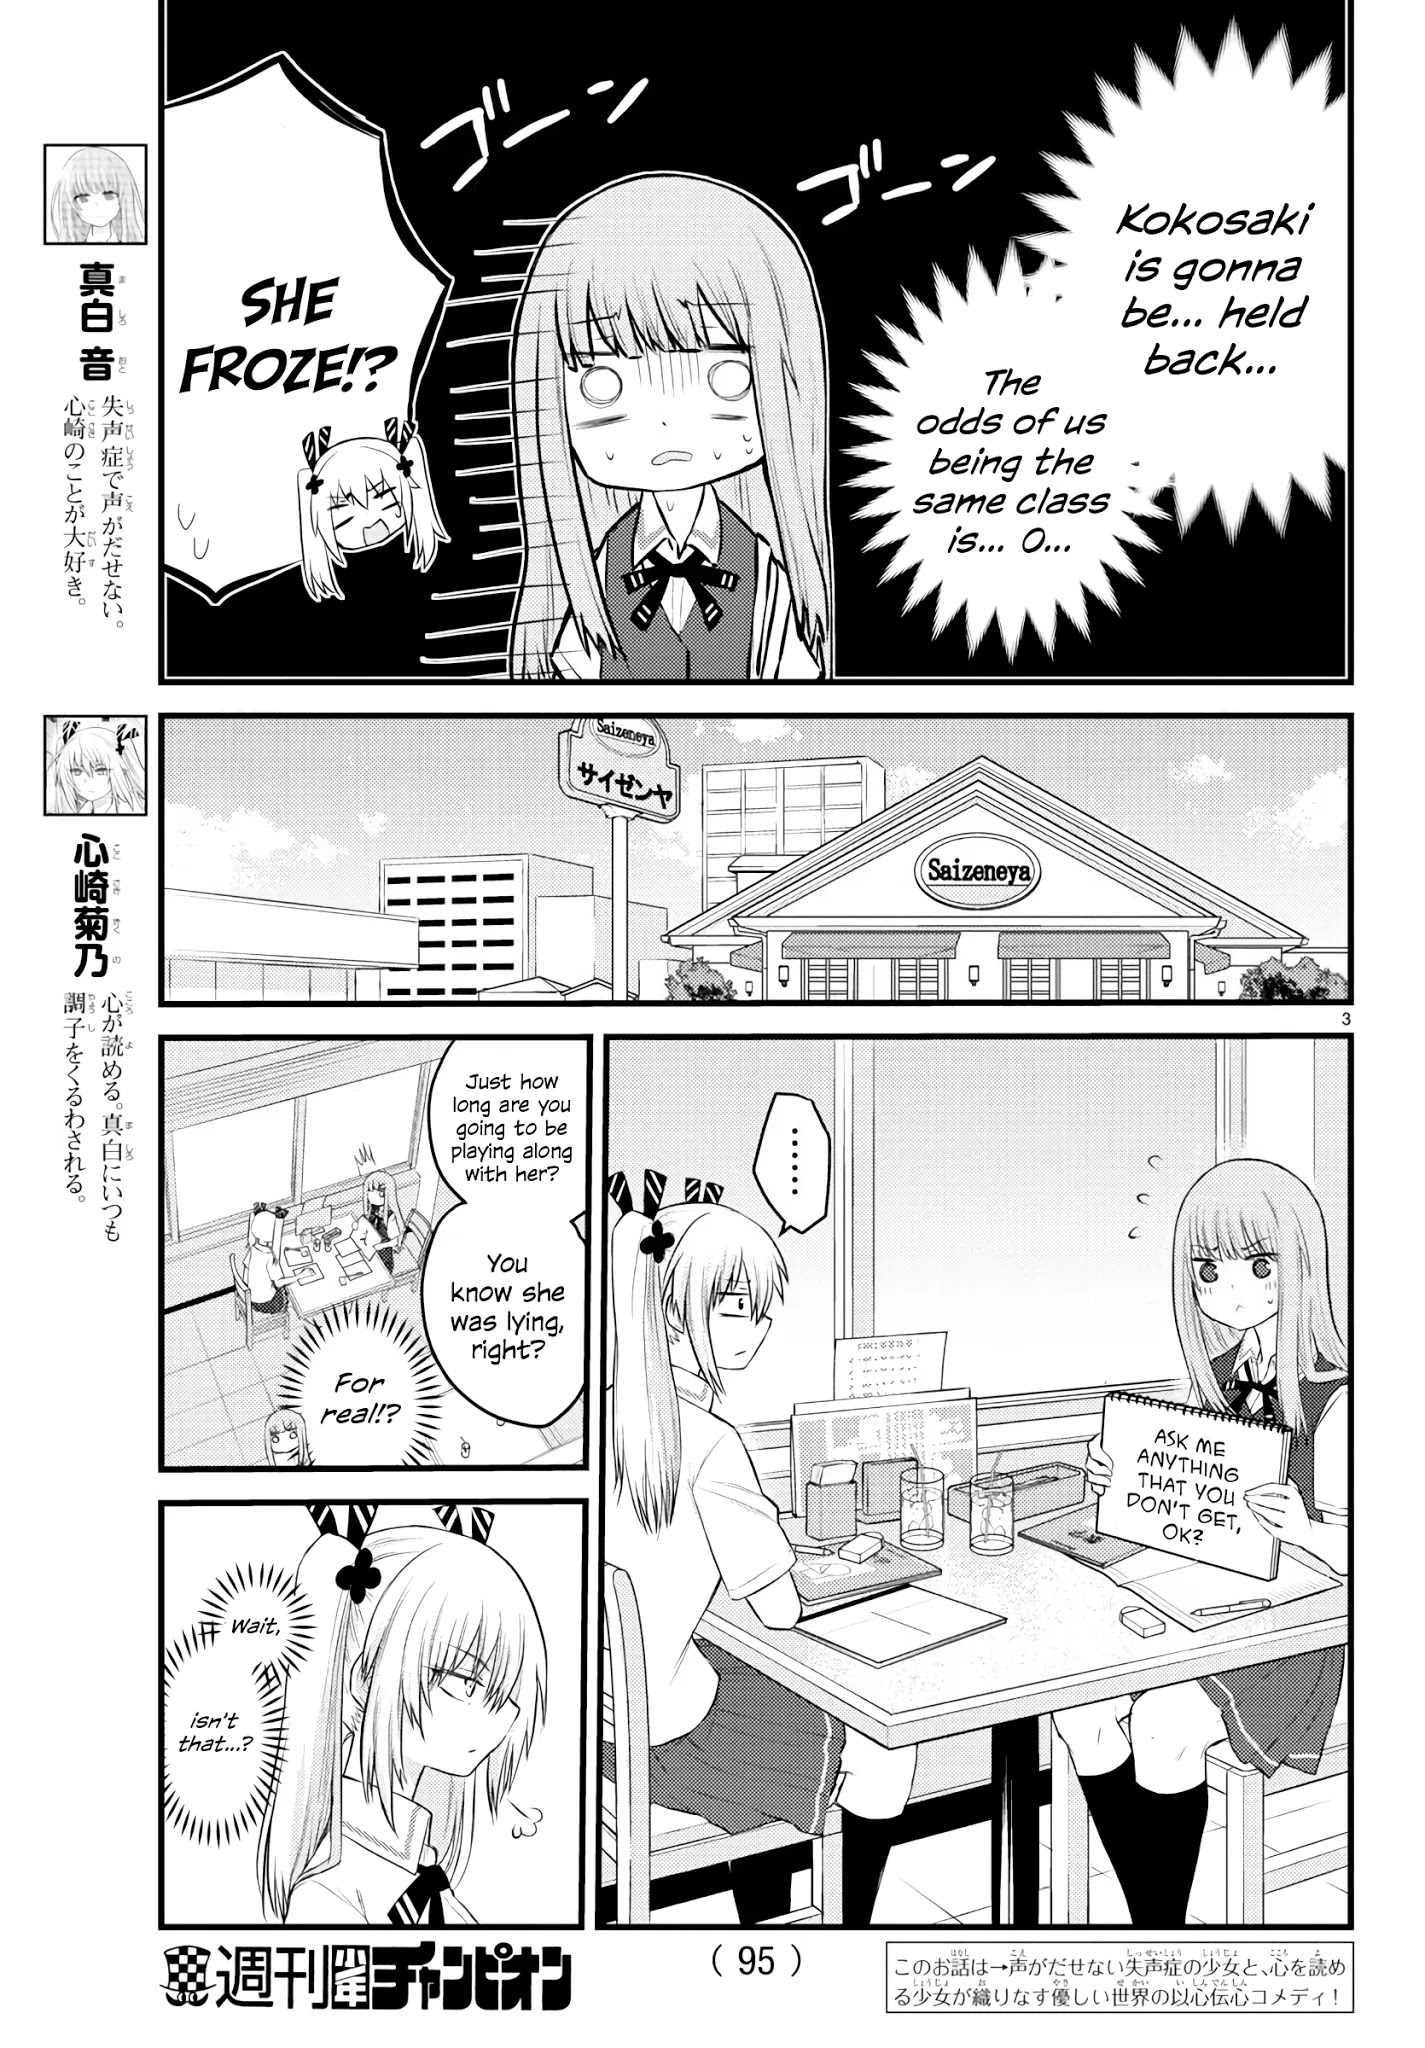 The Mute Girl And Her New Friend (Serialization) Chapter 16: Mashiro And The Family Restaurant - Picture 3